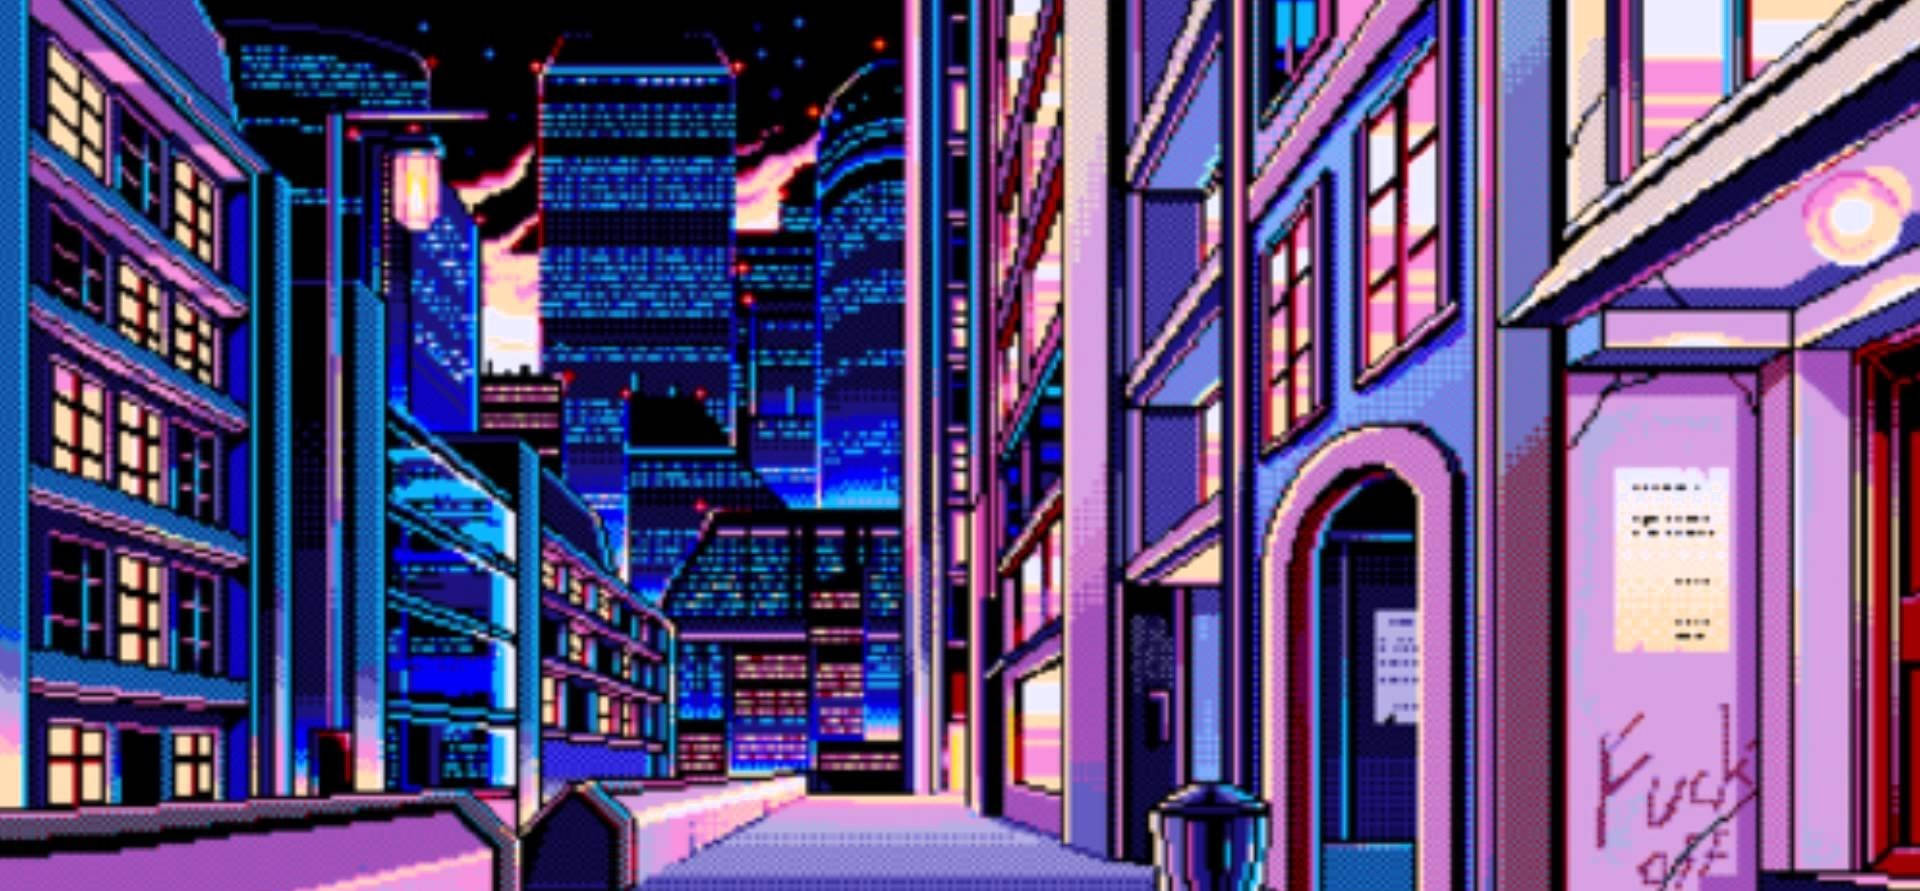 Glowing Pixel Art with Aesthetically Pleasing Patterns Wallpaper